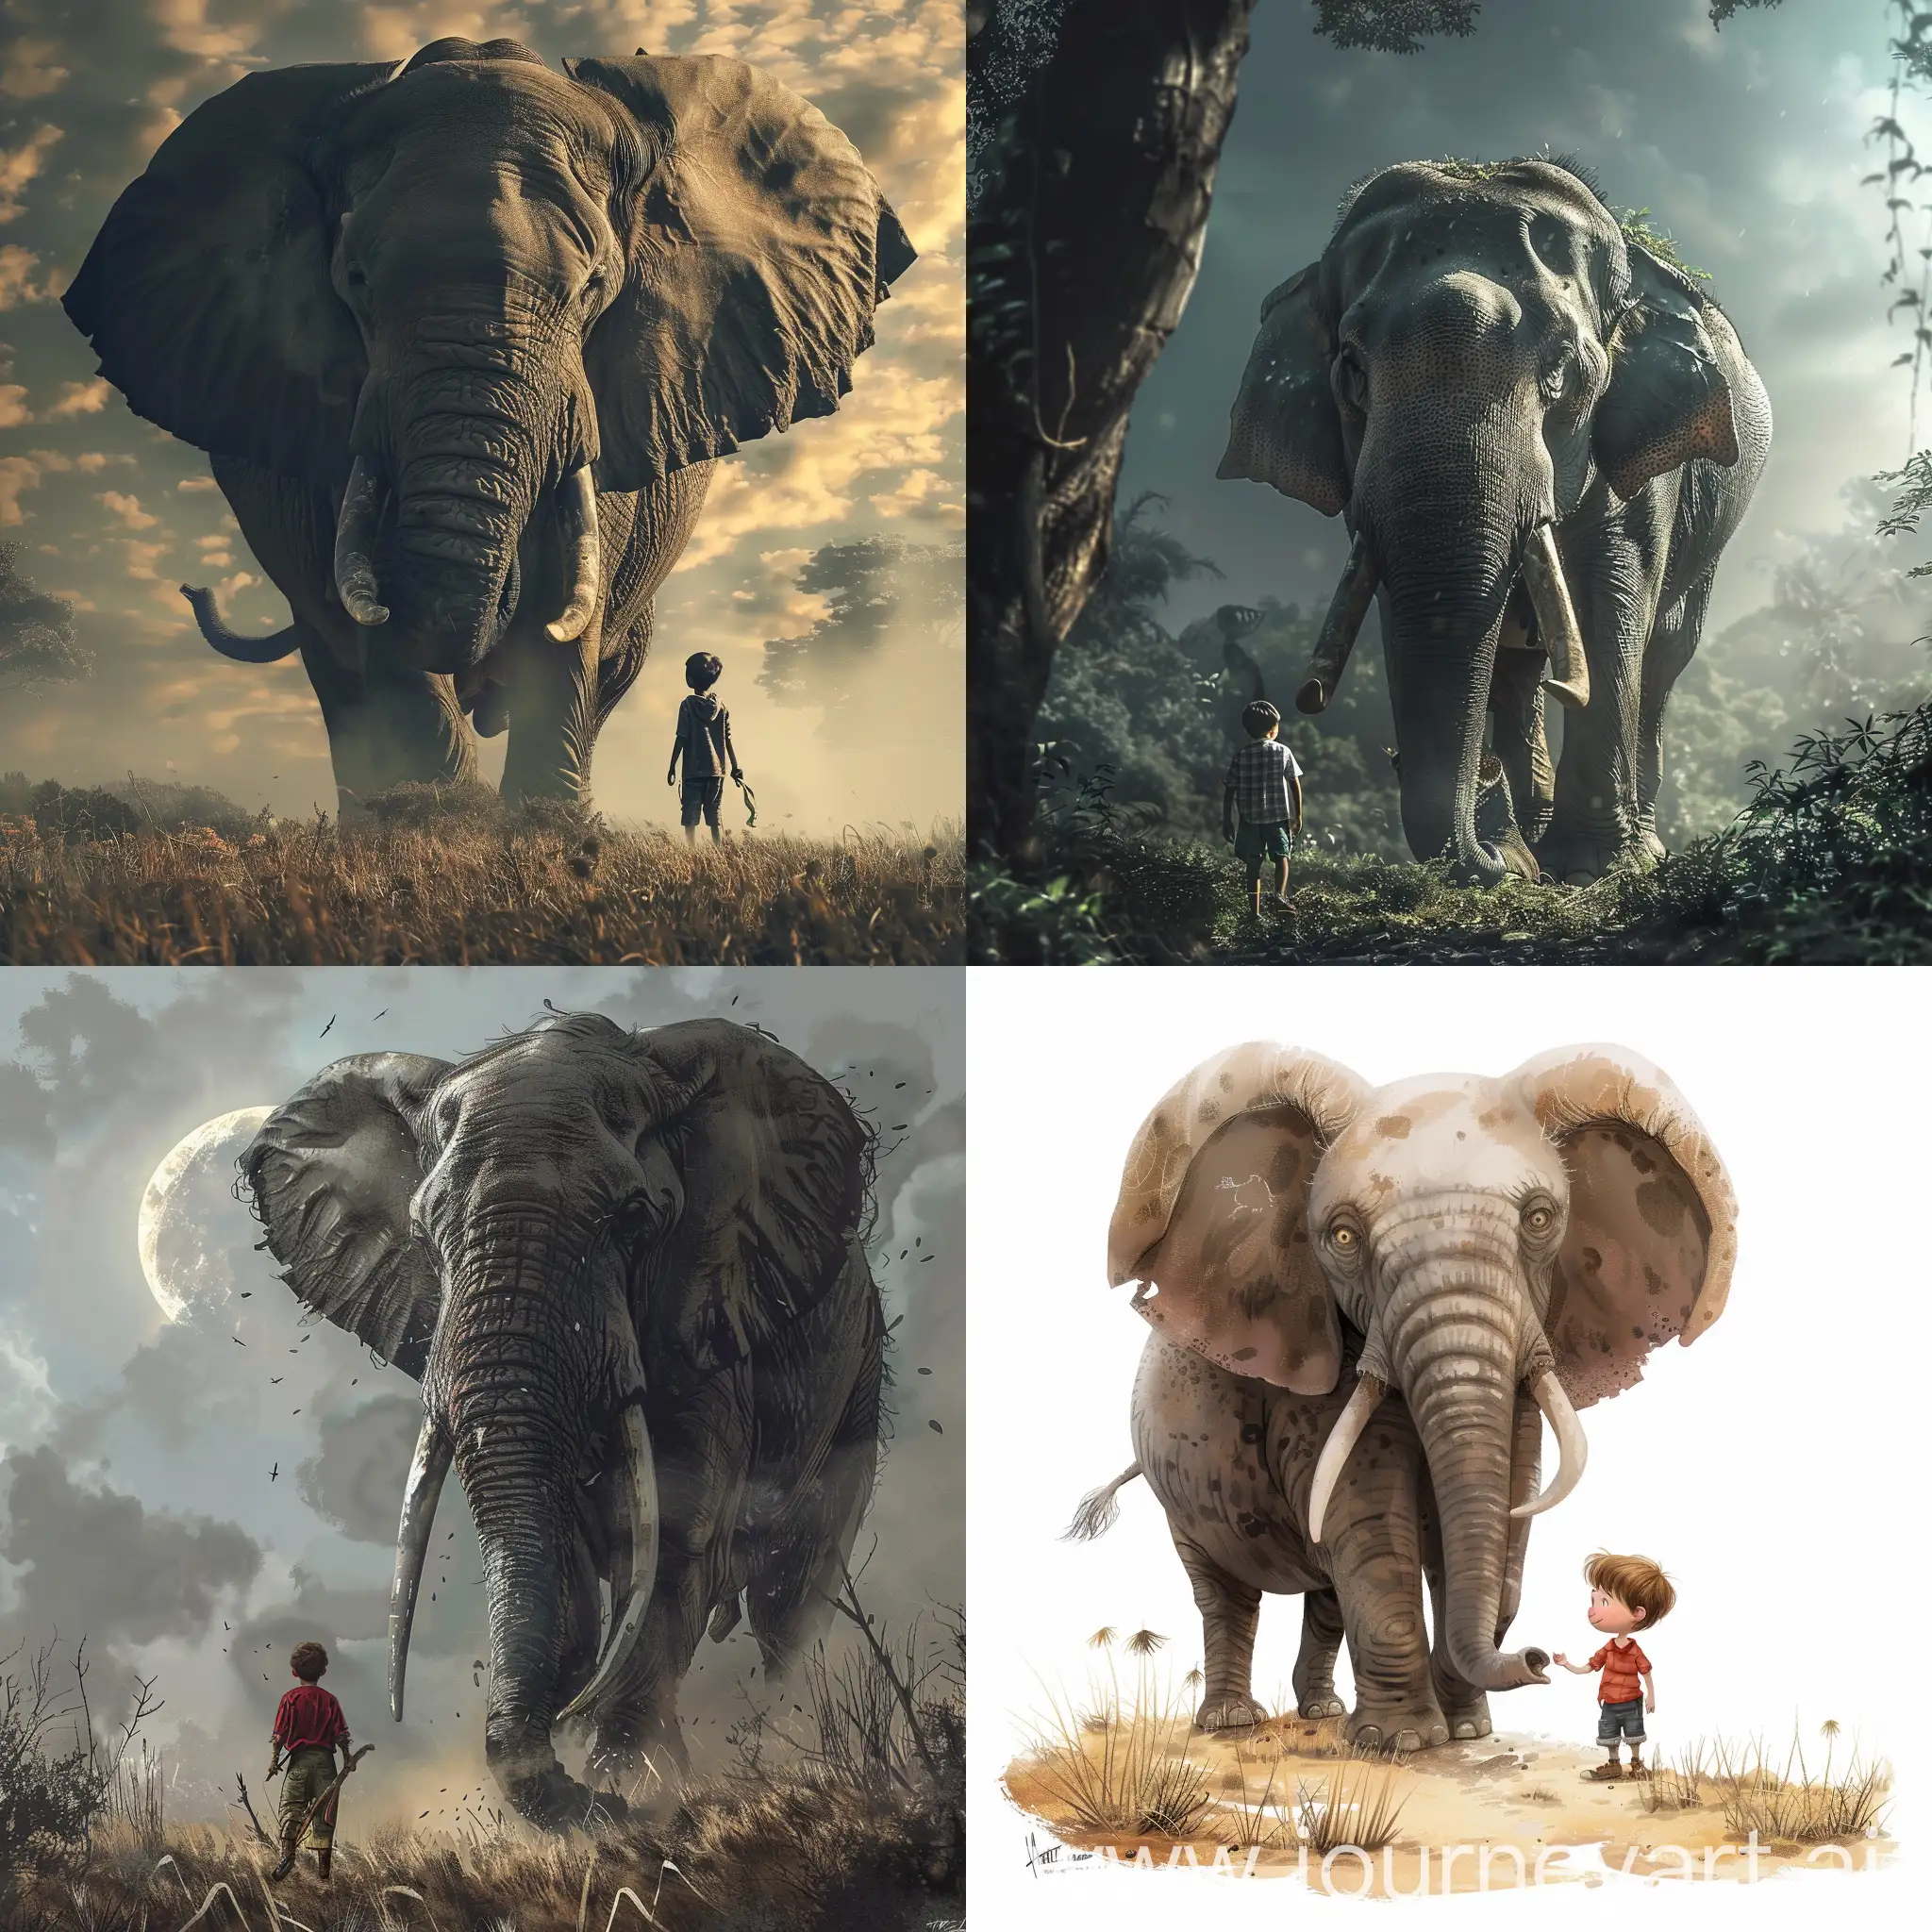 Adventurous-Boy-and-Majestic-Elephant-Encounter-in-a-11-Visual-Tale